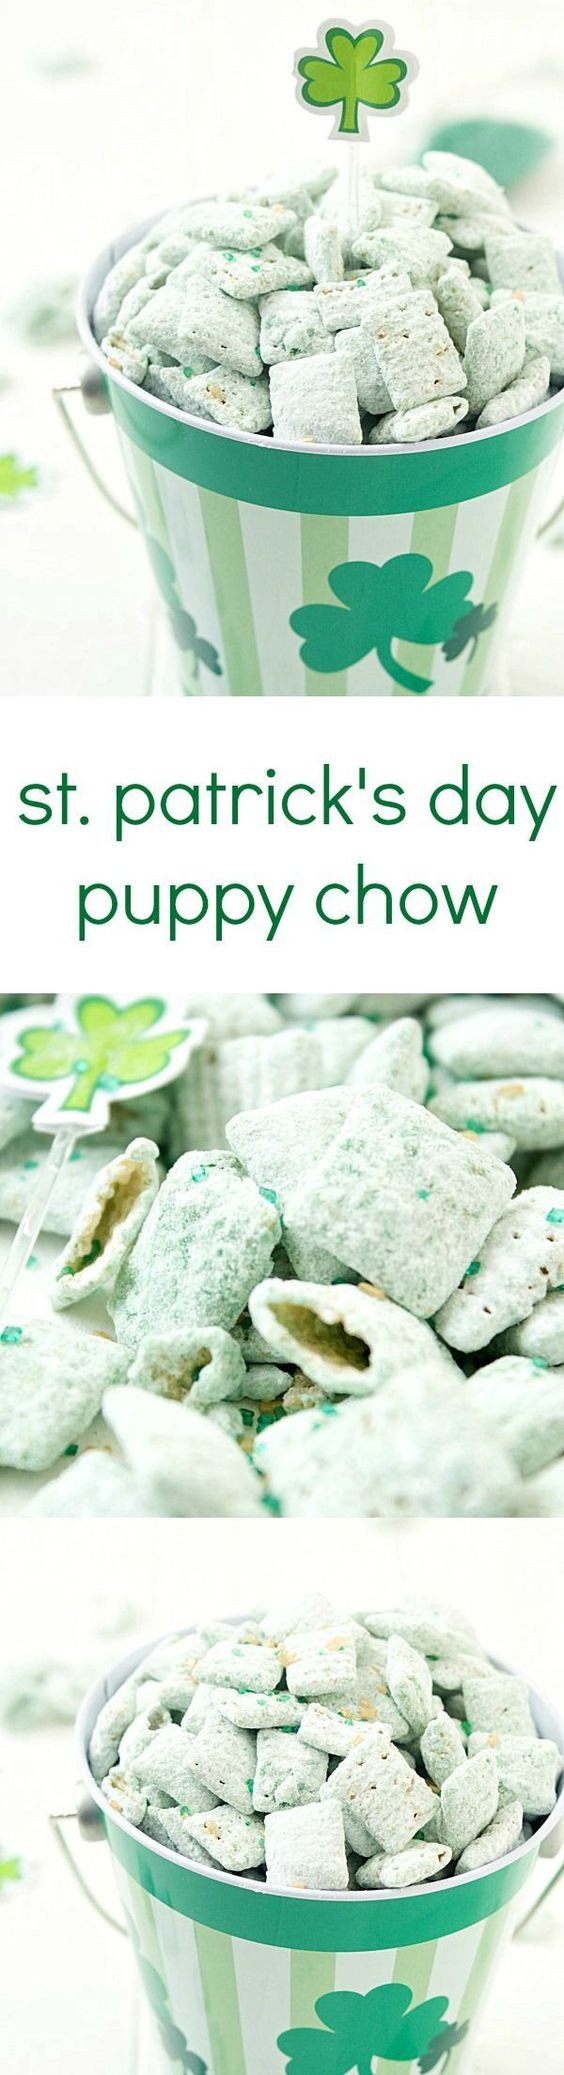 St Patrick's Day Party Menu
 The BEST Easy St Patrick’s Day Desserts and Treats